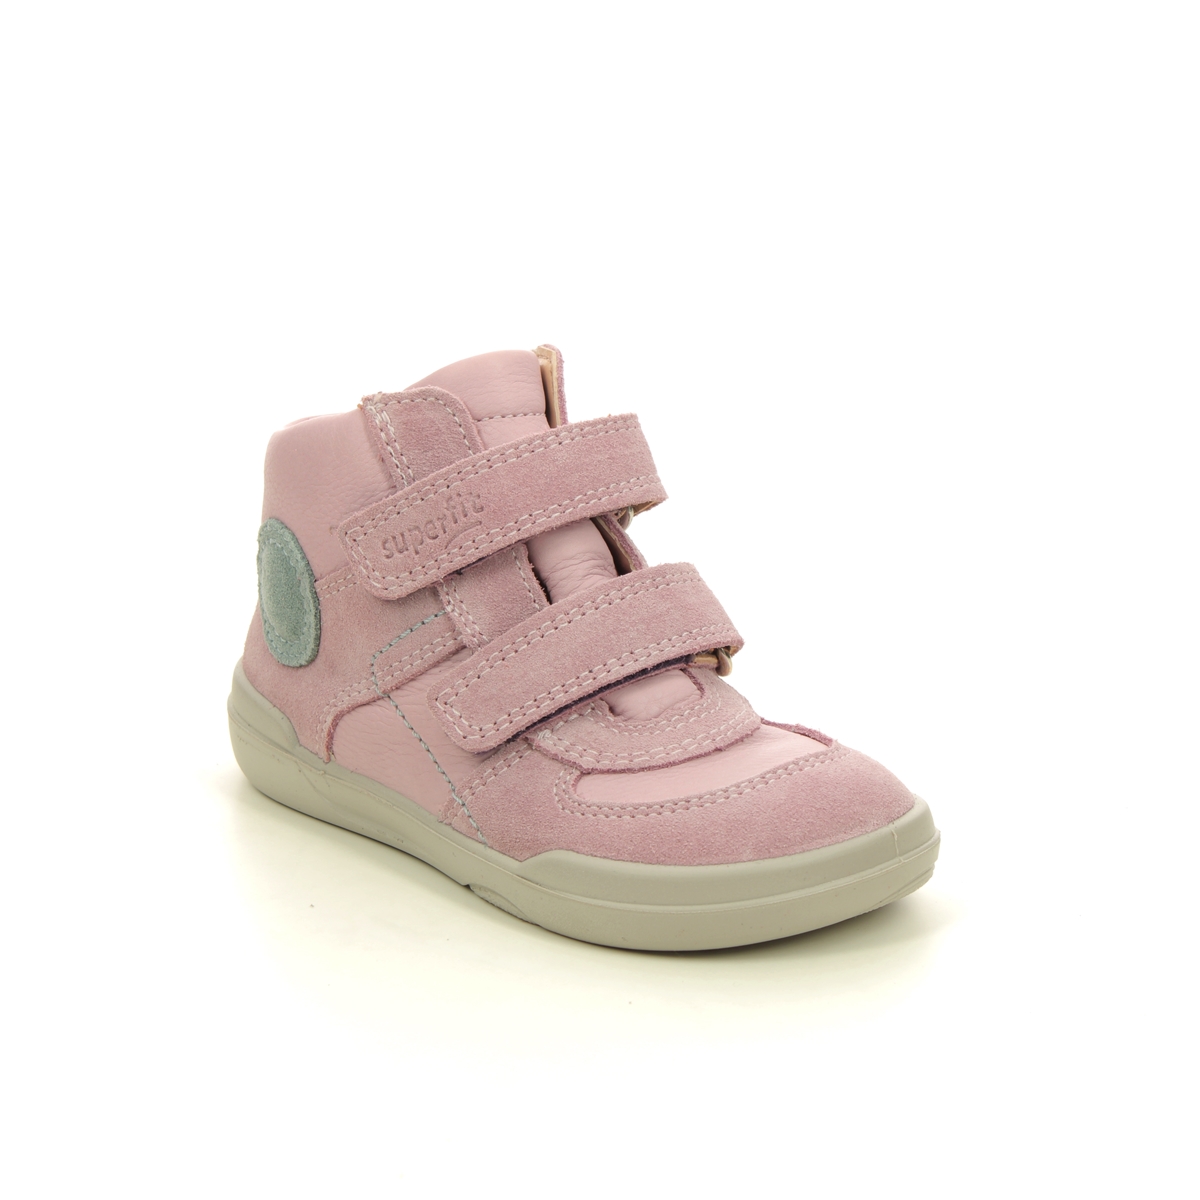 Superfit Superfree Gtx Pink Suede Kids Toddler Girls Boots 1000541-5500 In Size 23 In Plain Pink Suede